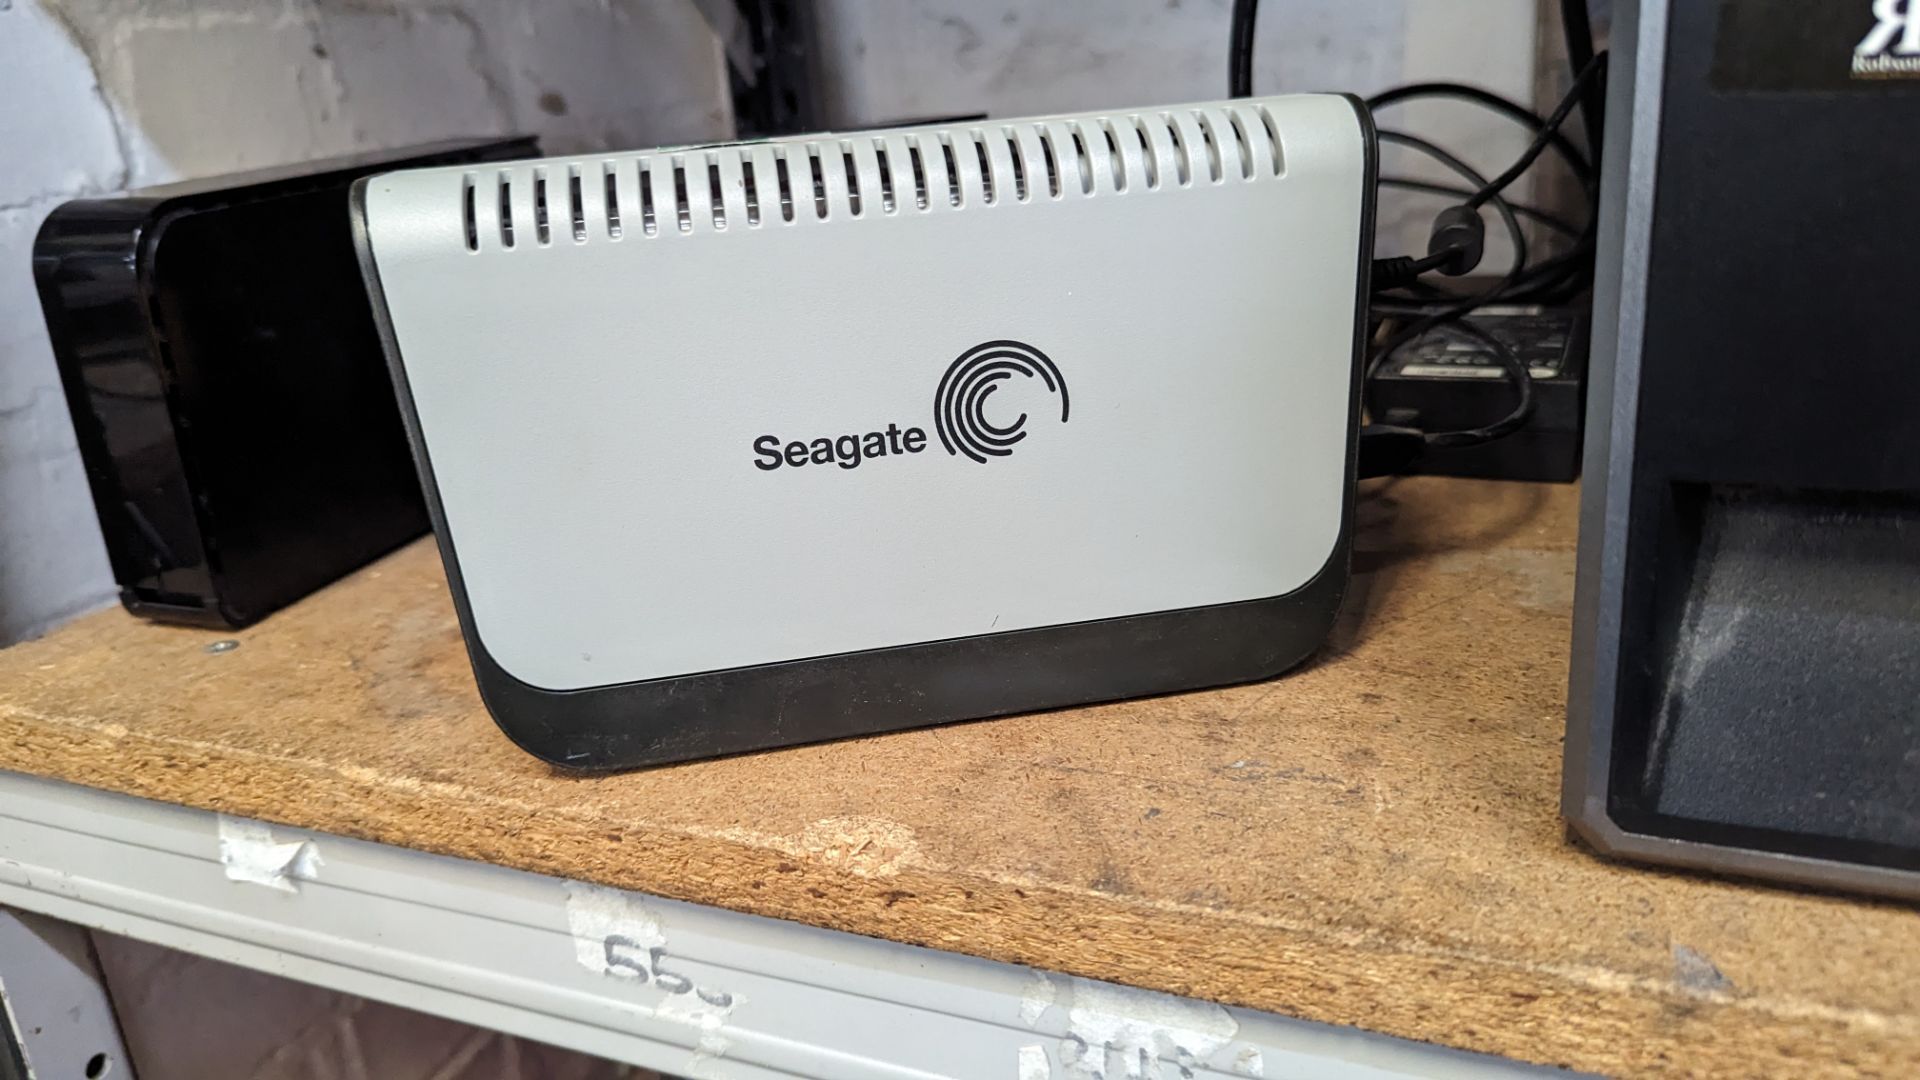 Seagate external hard drive - Image 4 of 7